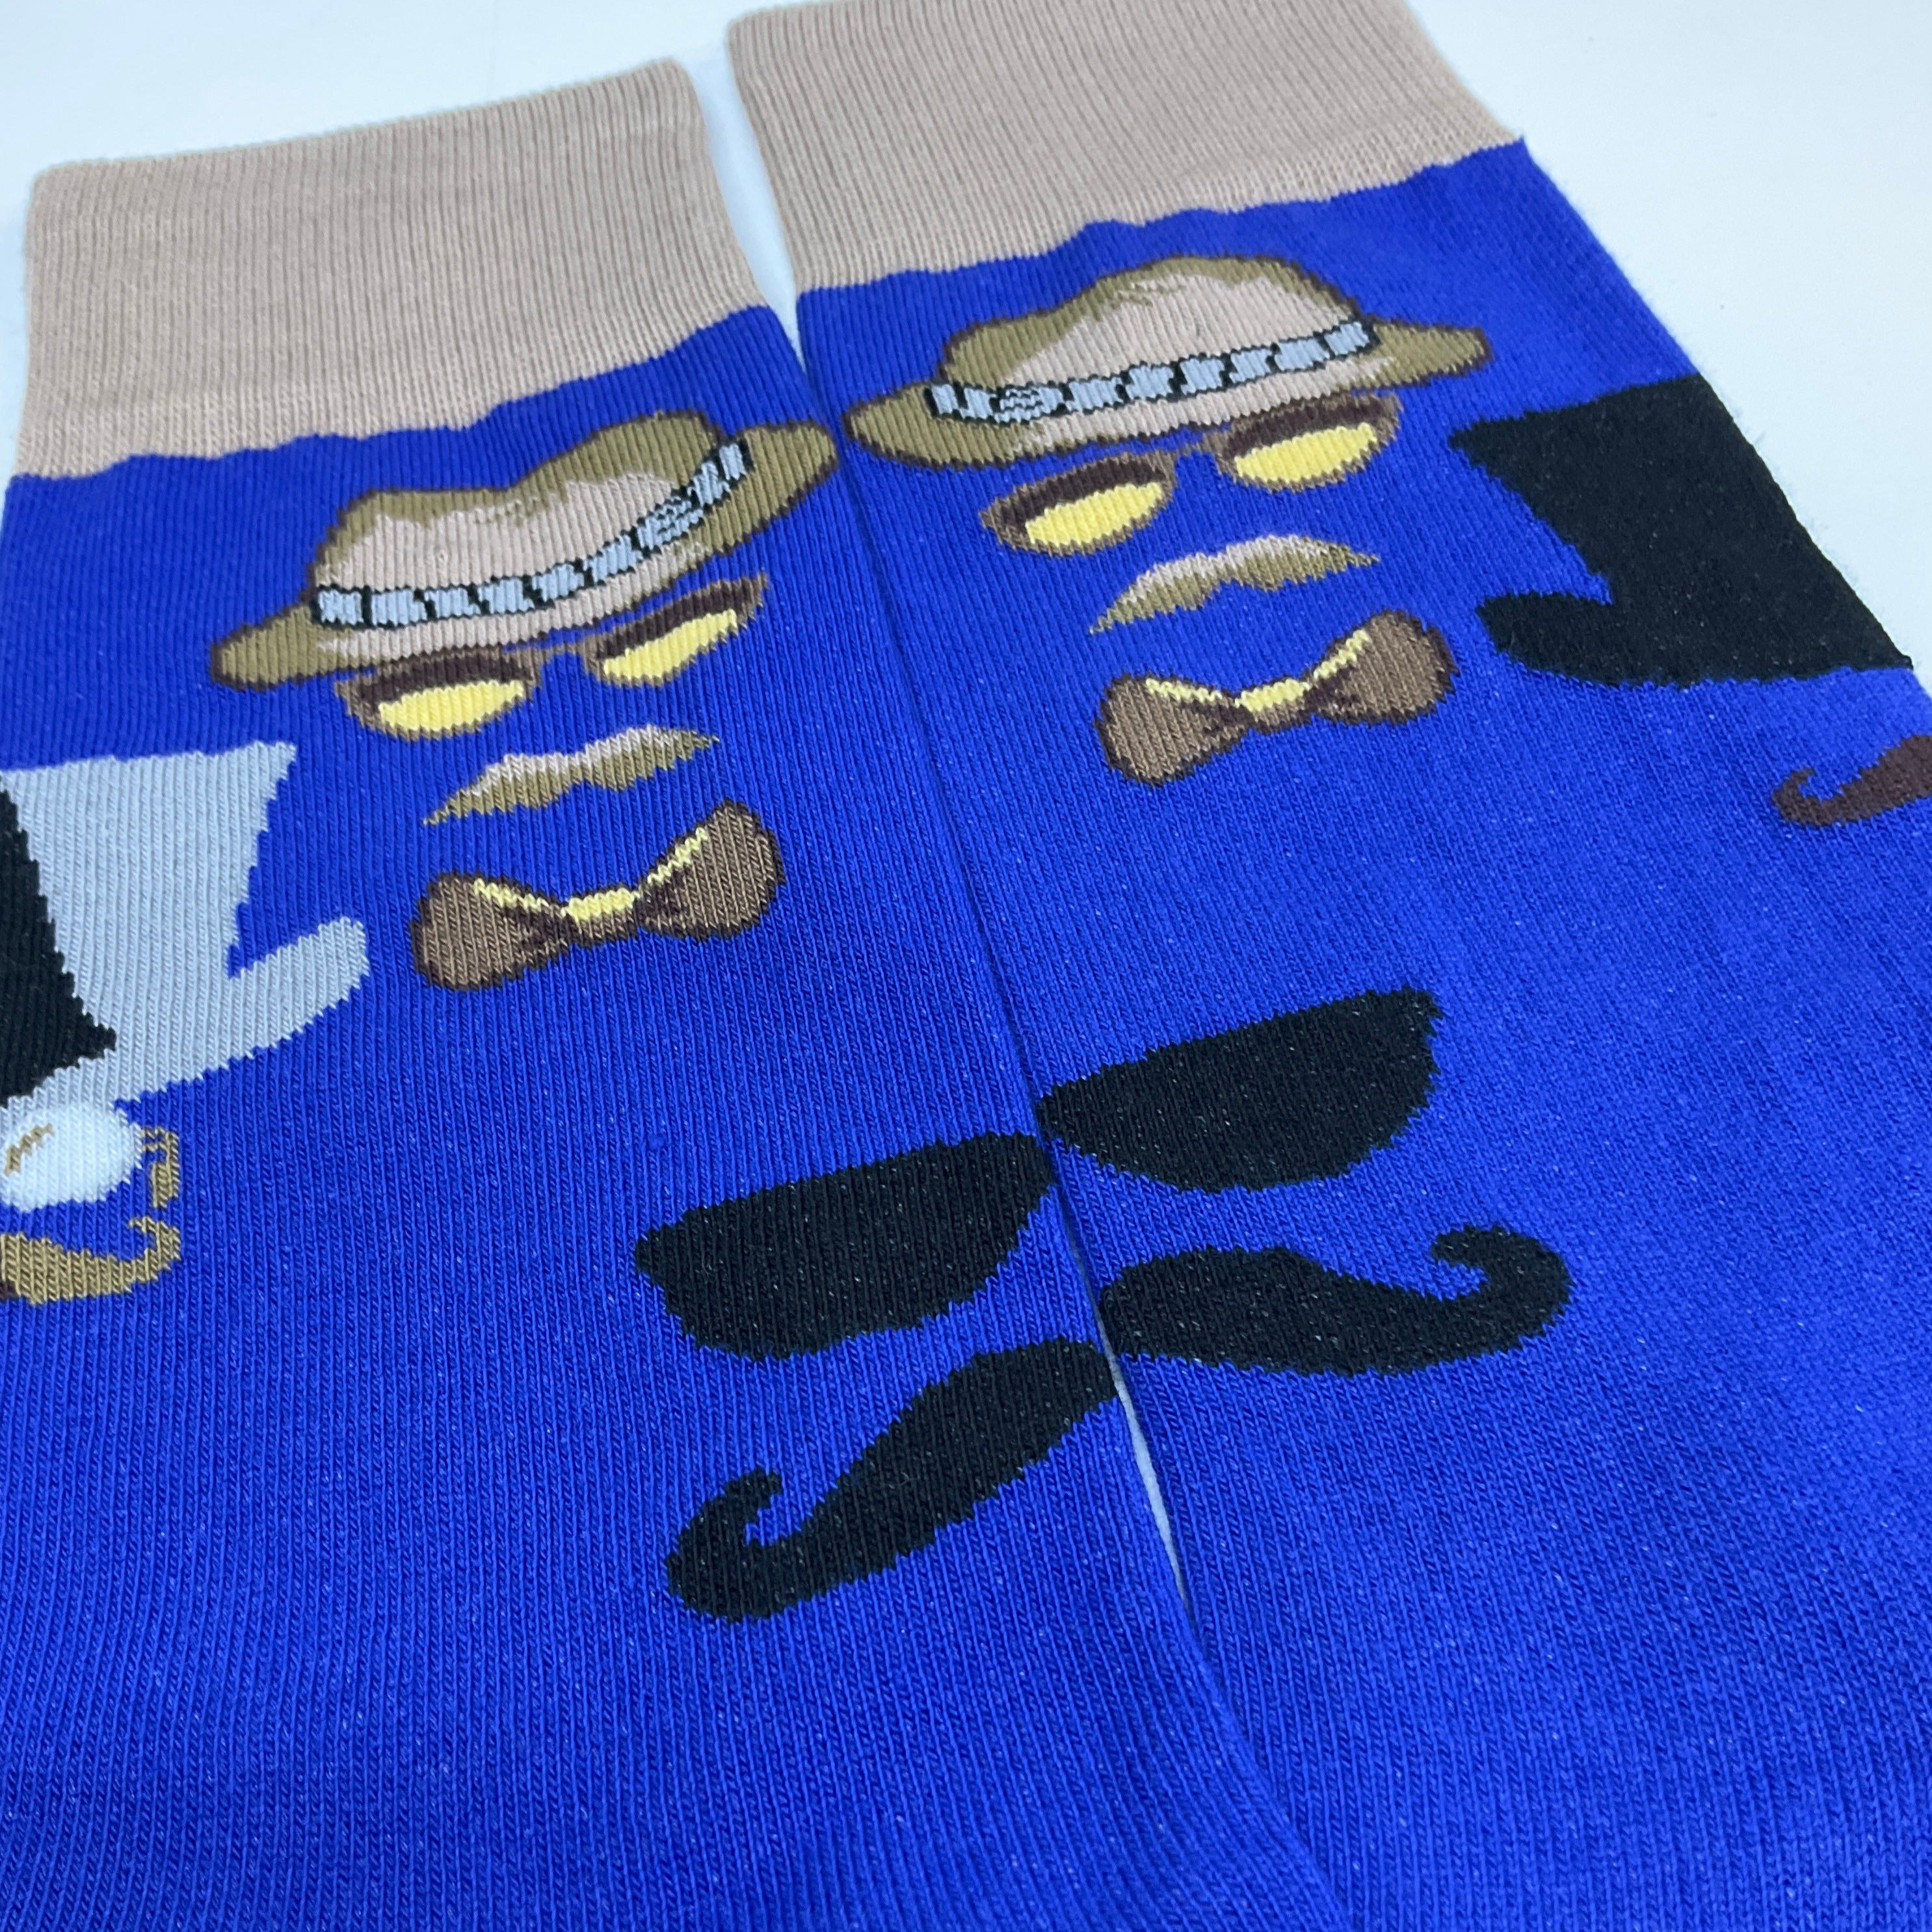 Mustache and Sunglasses Men Socks from the Sock Panda (Adult Large)